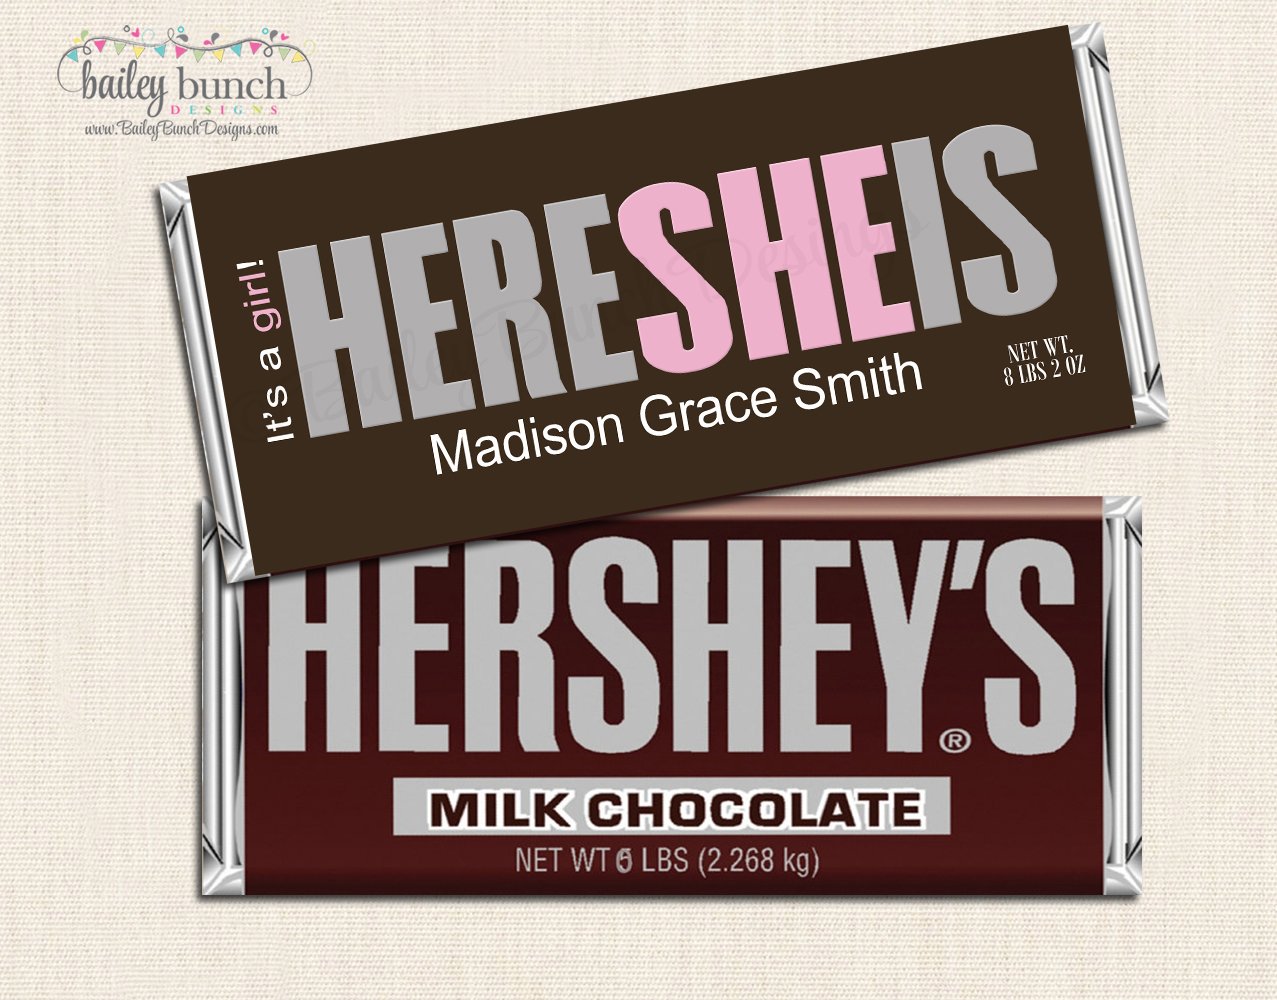 Designer Candy Wrapper Hershey's Candy Wrapper Chocolate 